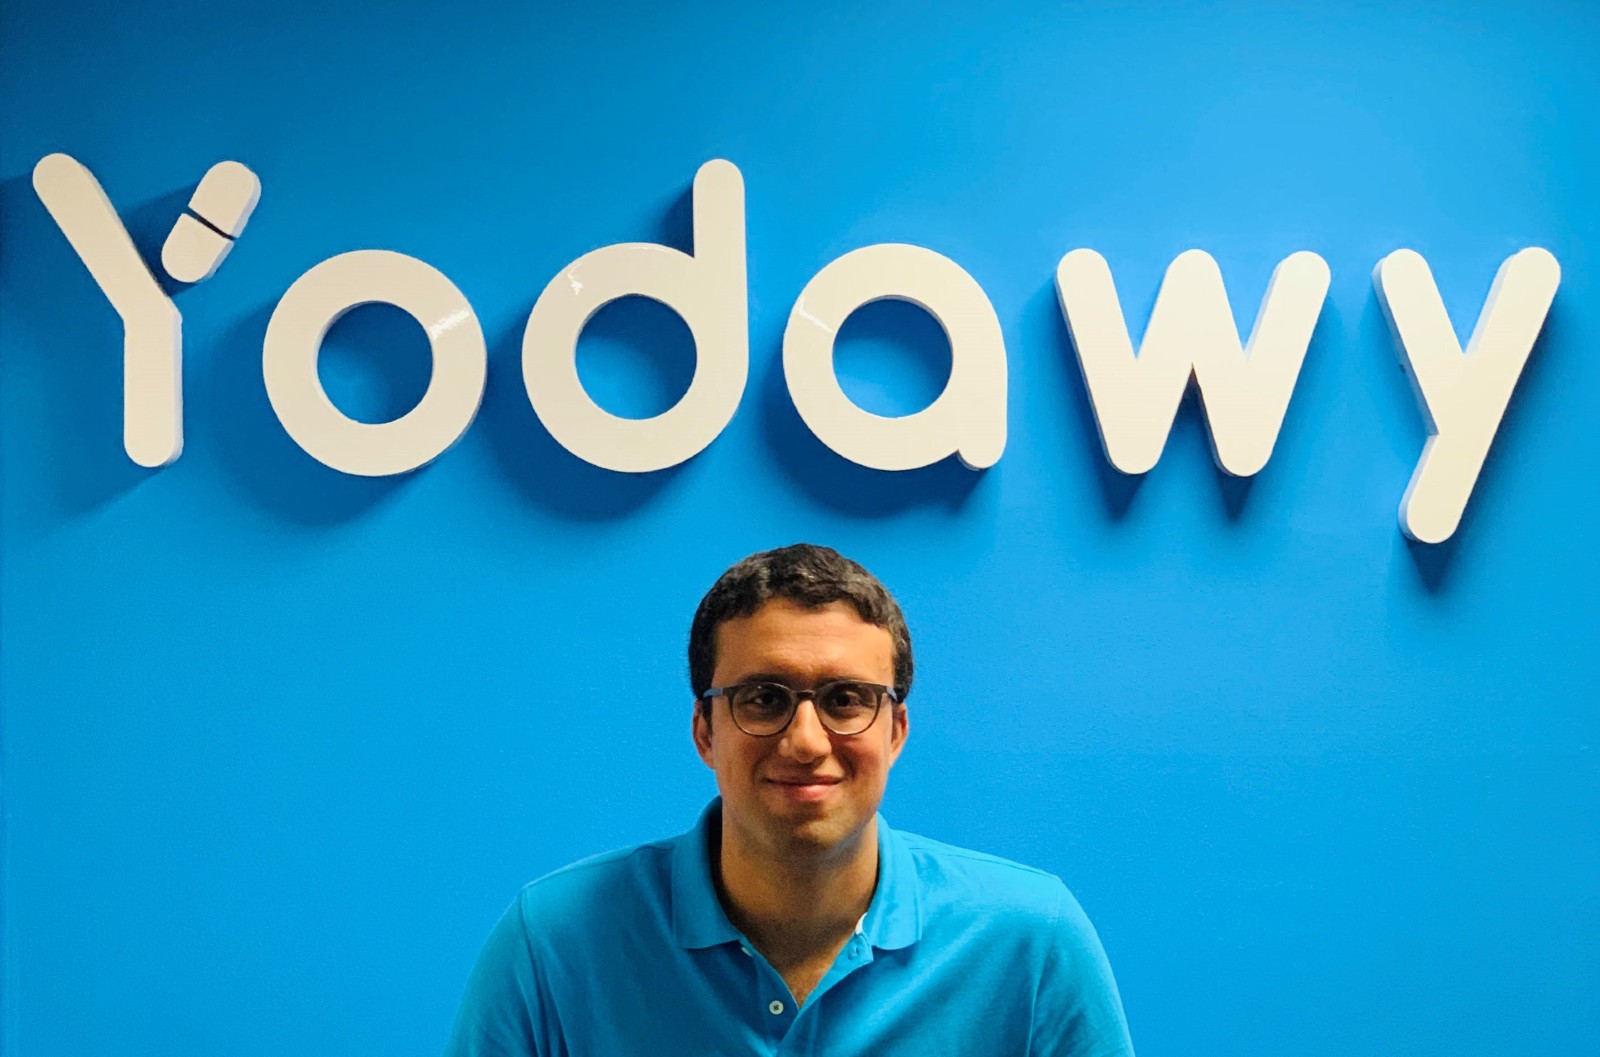 Egypt’s Yodawy to Expand Healthcare Solutions with $16 Million Series B Funding